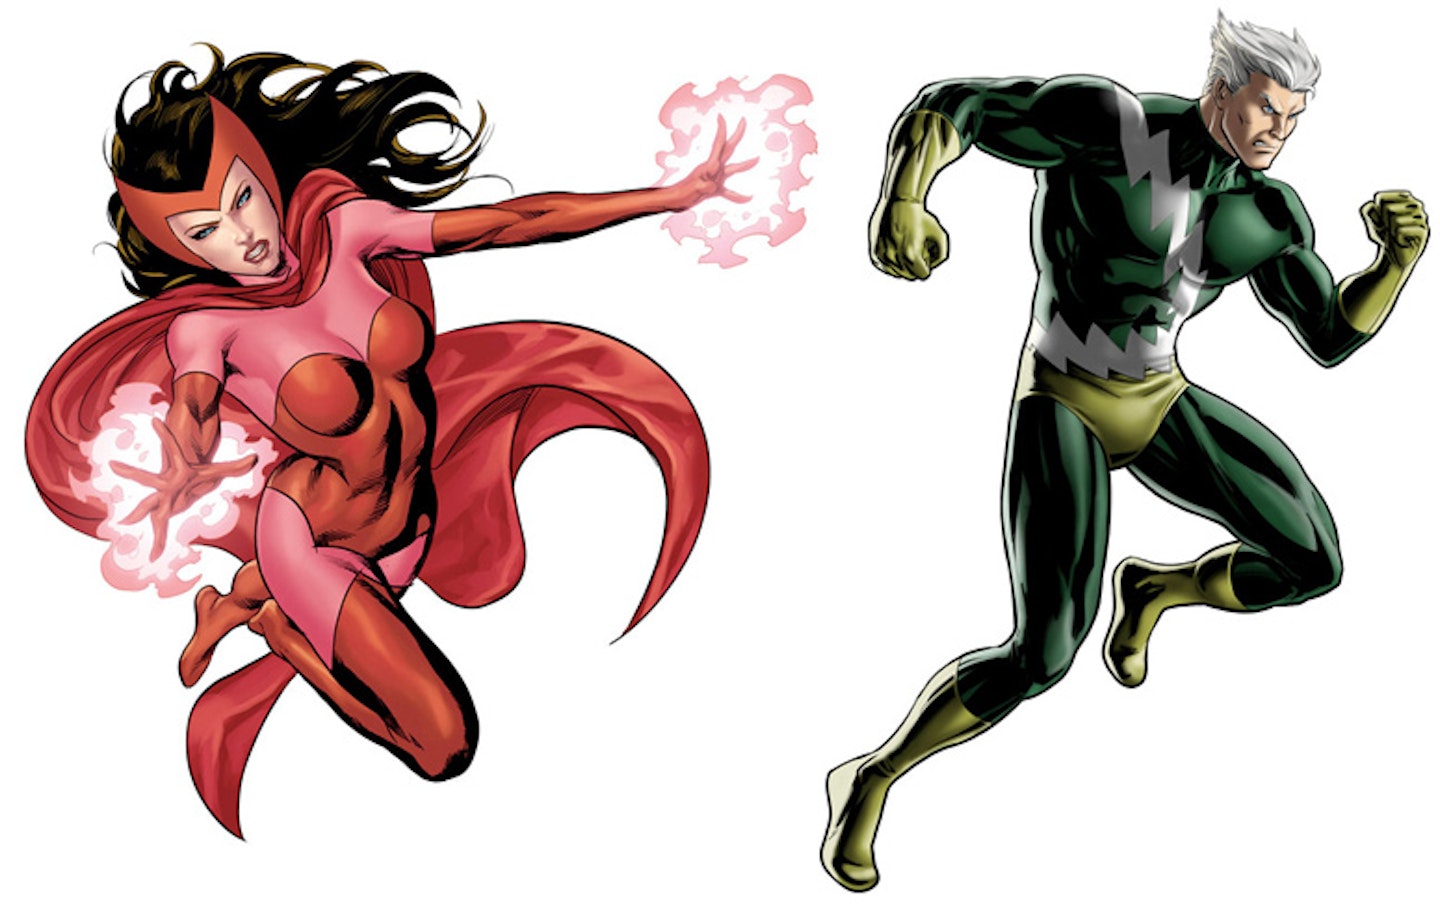 Quicksilver (X-Men), Scarlet Witch and Quicksilver (Avengers)